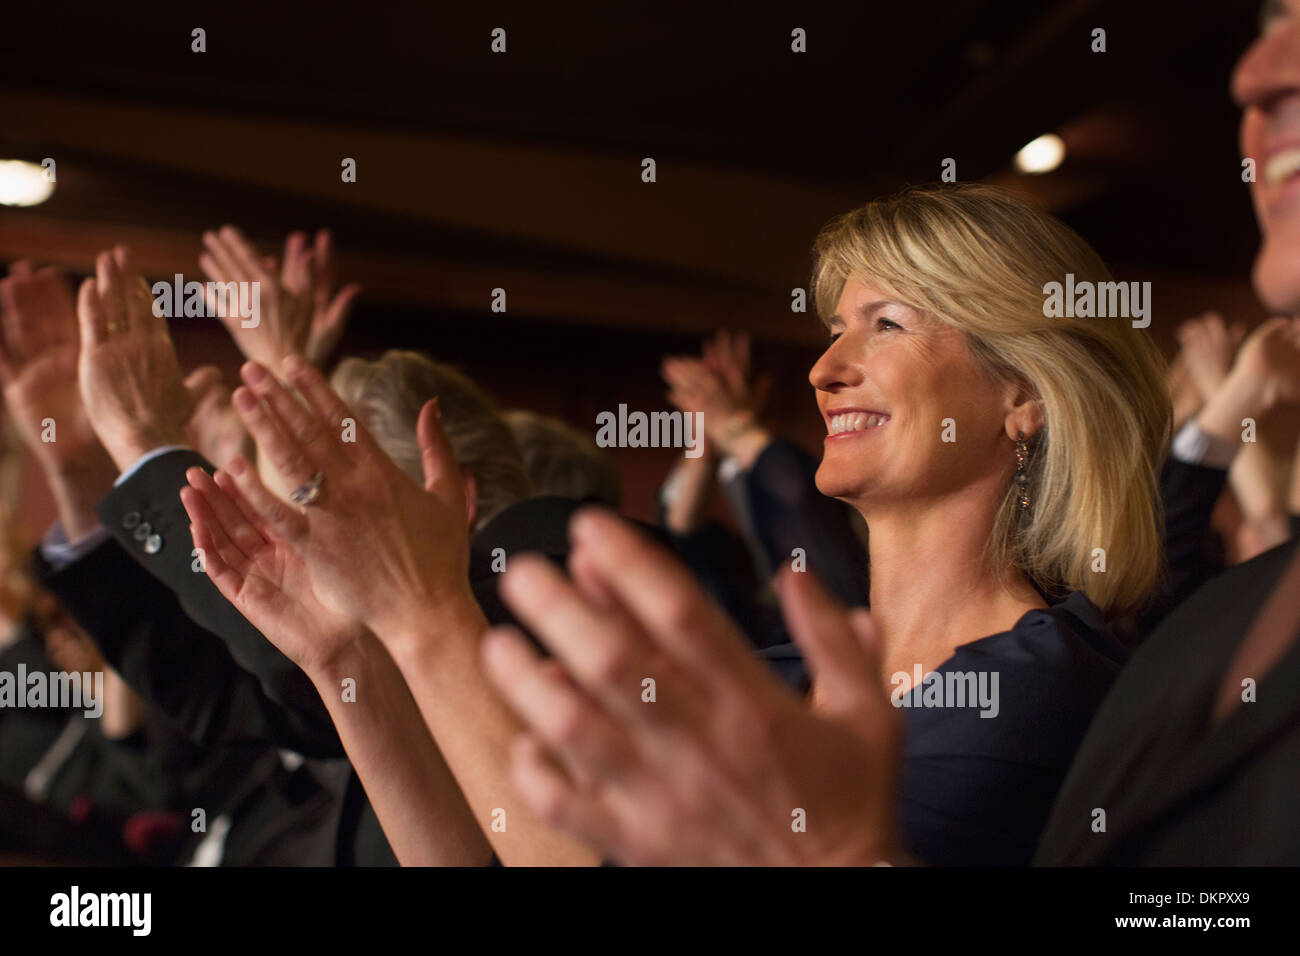 Close up of enthusiastic woman clapping in theater audience Stock Photo